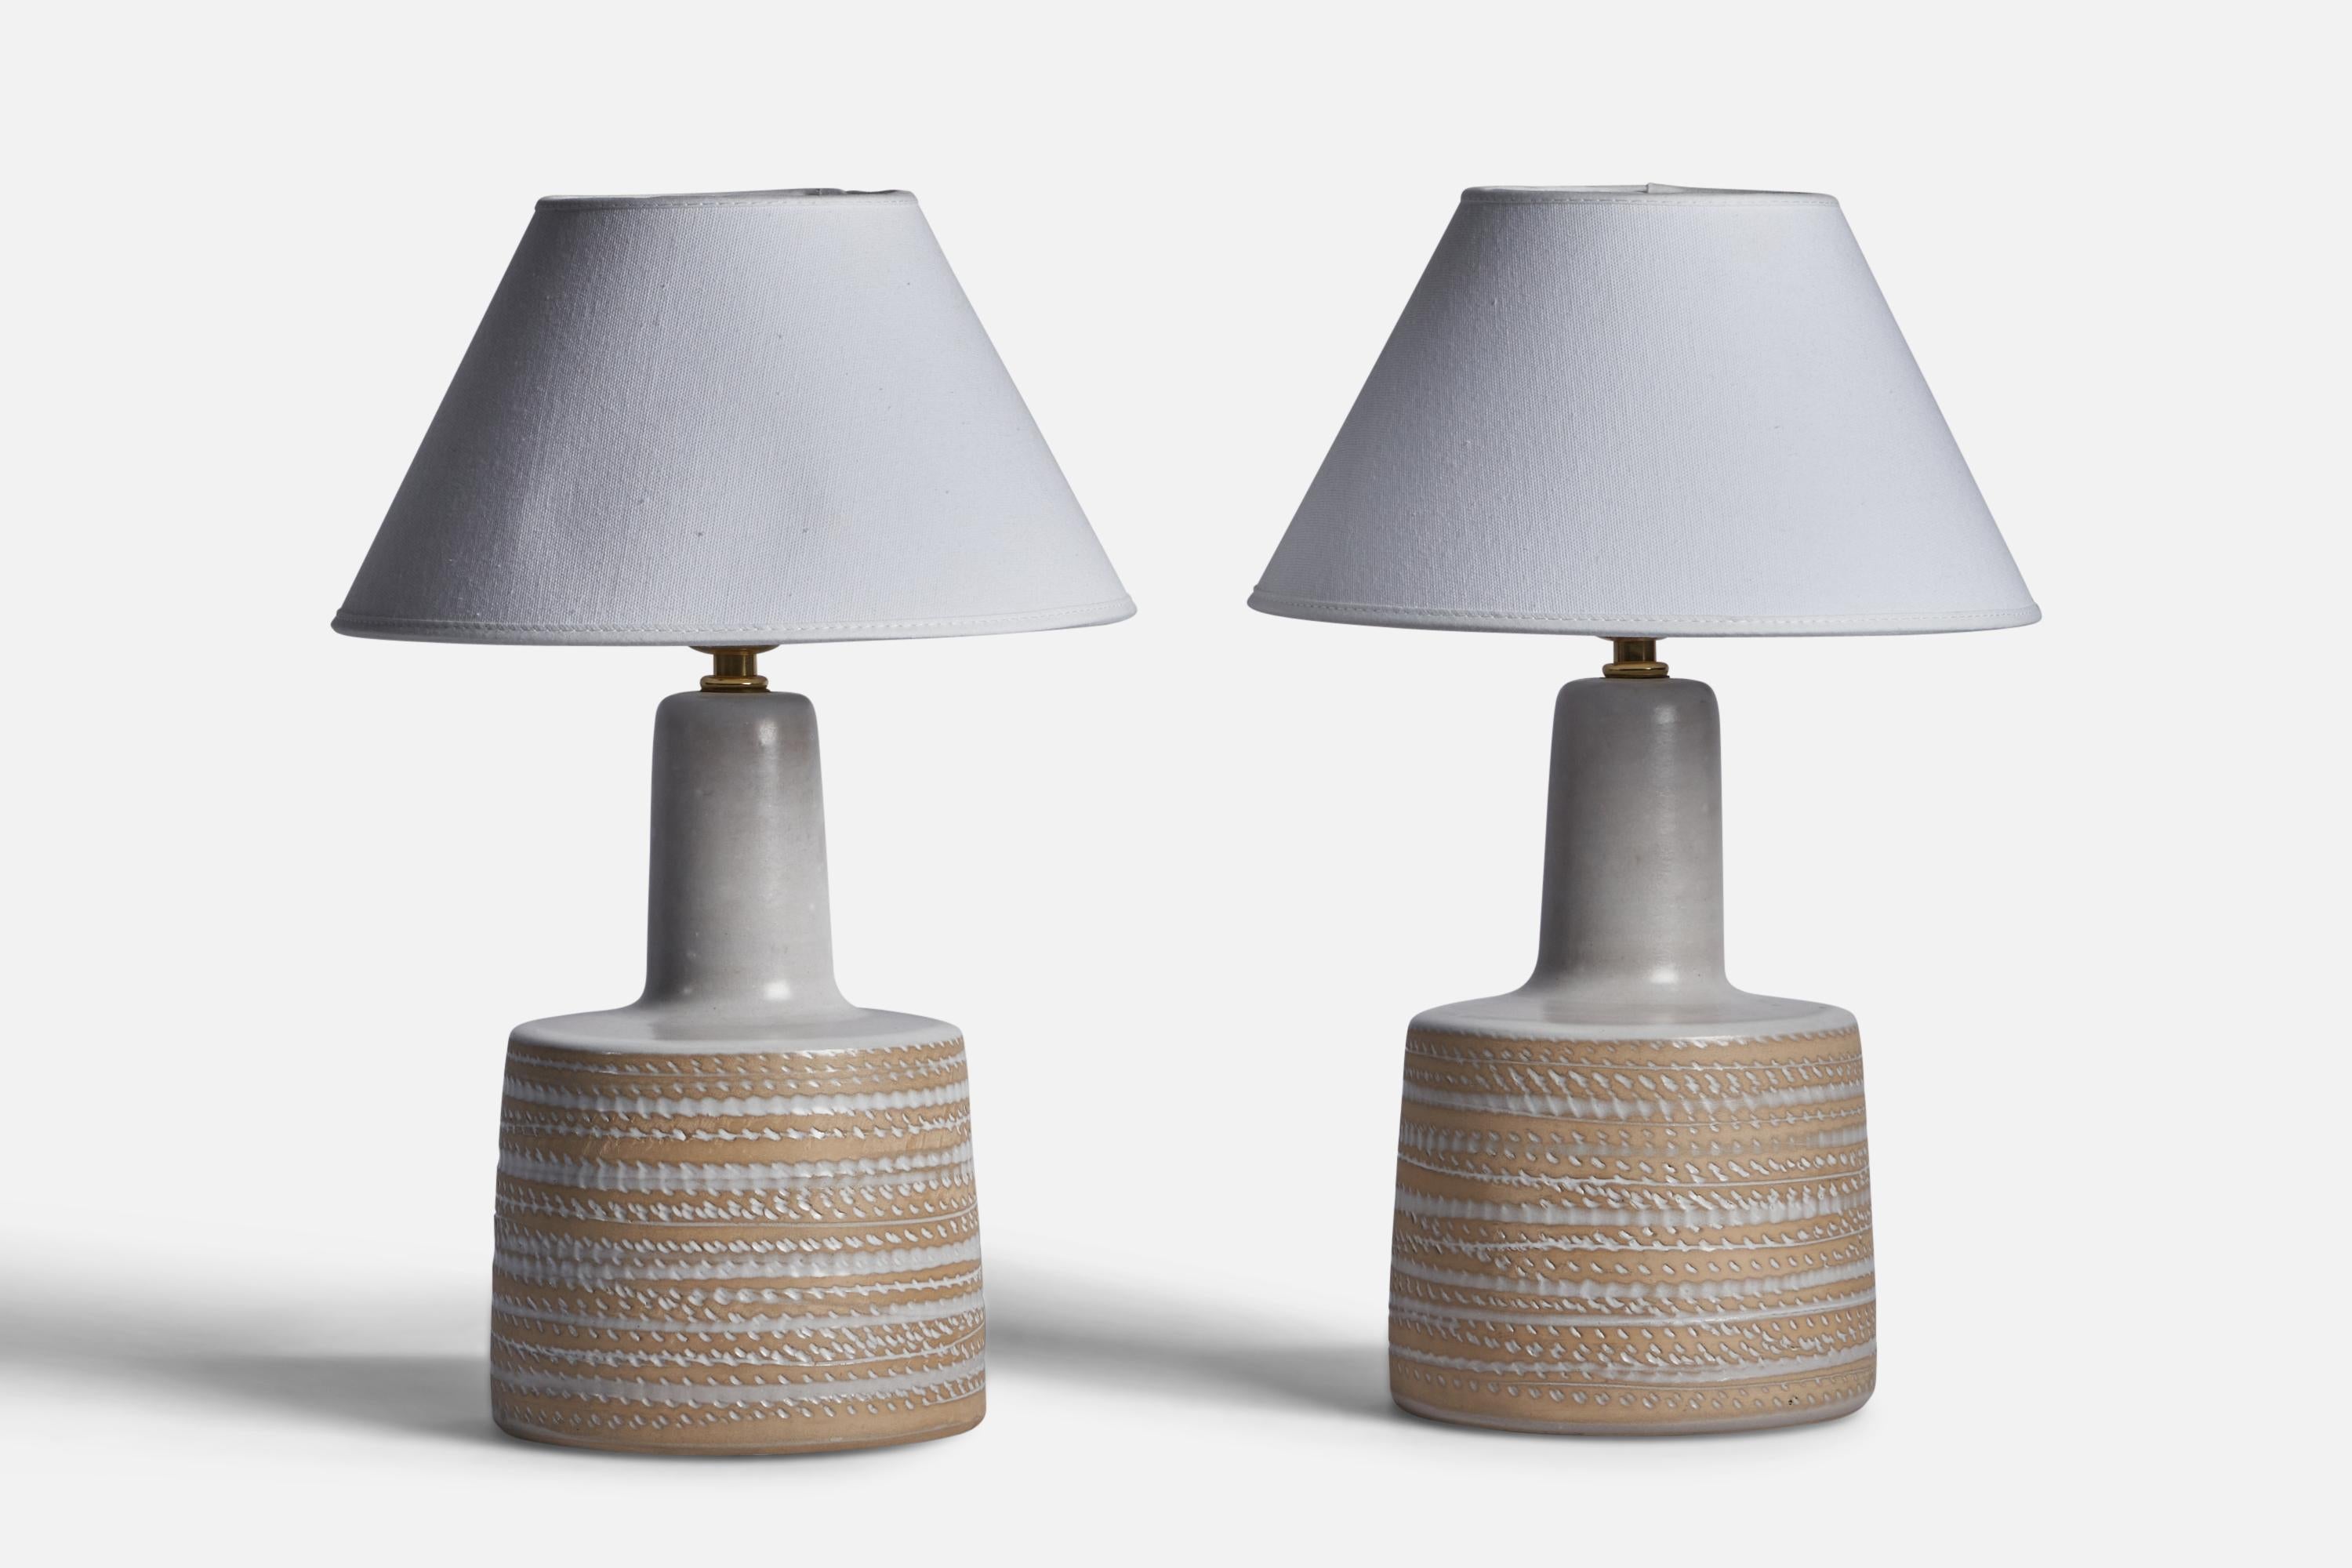 A pair of grey and beige-glazed ceramic table lamps designed by Jane & Gordon Martz and produced by Marshall Studios, USA, 1960s.

Dimensions of Lamp (inches): 12” H x 6.25” Diameter
Dimensions of Shade (inches): 4.5” Top Diameter x 10” Bottom